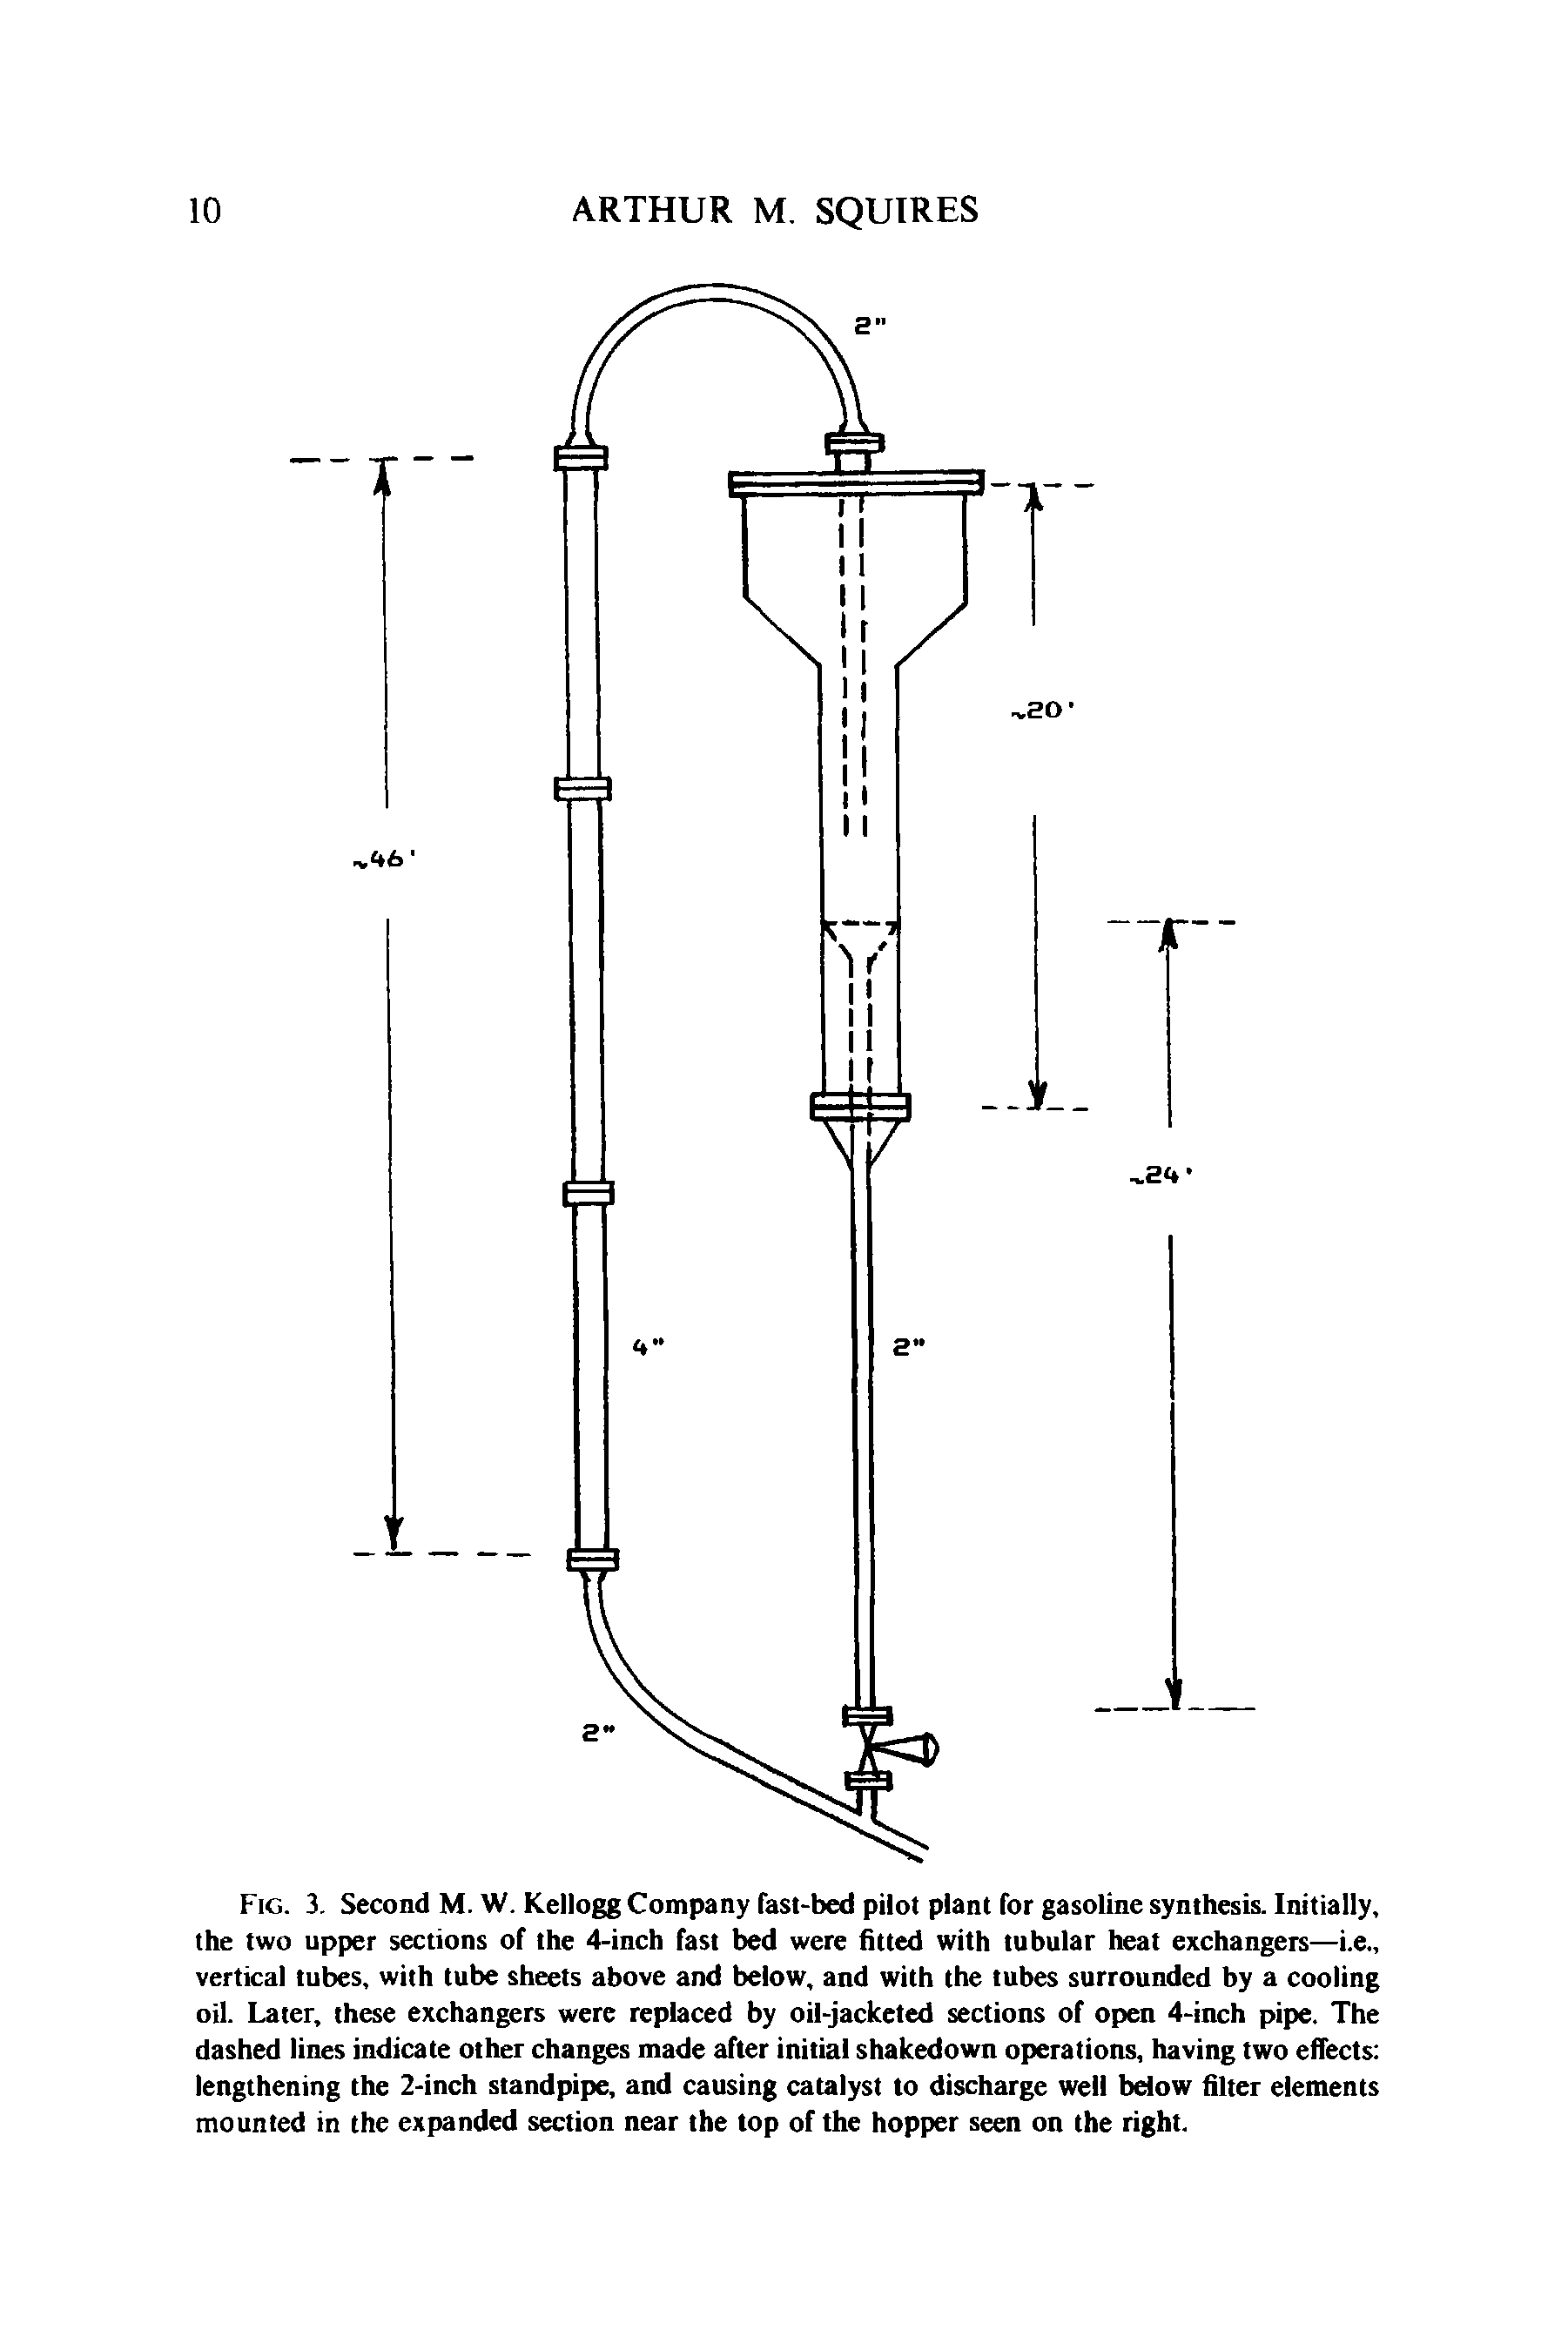 Fig. 3. Second M. W. Kellogg Company fast-bed pilot plant for gasoline synthesis. Initially, the two upper sections of the 4-inch fast bed were fitted with tubular heat exchangers—i.e., vertical tubes, with tube sheets above and below, and with the tubes surrounded by a cooling oil. Later, these exchangers were replaced by oil-jacketed sections of open 4-inch pipe. The dashed lines indicate other changes made after initial shakedown operations, having two effects lengthening the 2-inch standpipe, and causing catalyst to discharge well below filter elements mounted in the expanded section near the top of the hopper seen on the right.